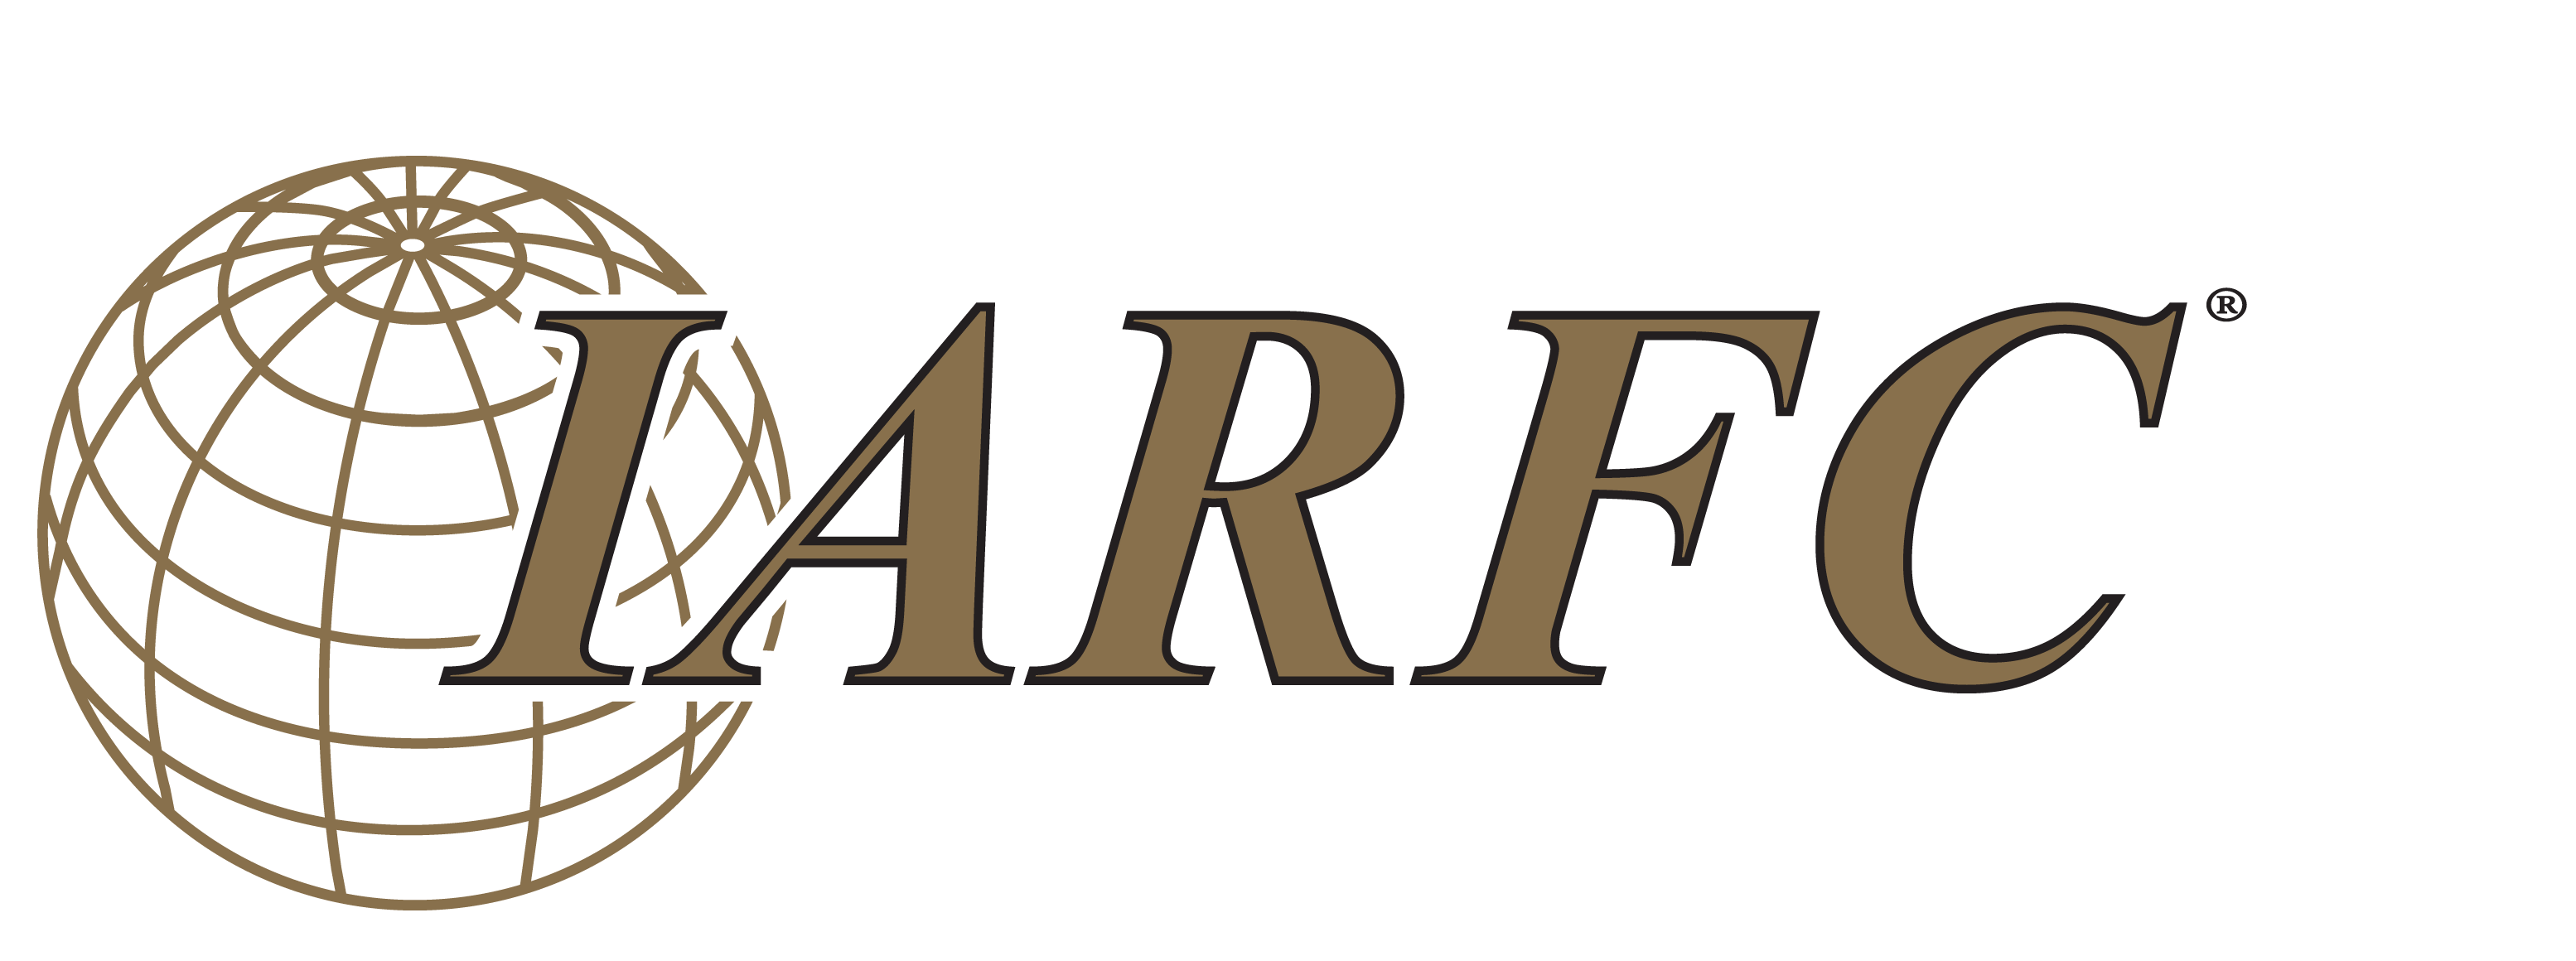 Founded in 1984, the International Association of Registered Financial Consultants (IARFC®) is a non-profit 501(c)6 professional association of financial consultants in the United States and Internati